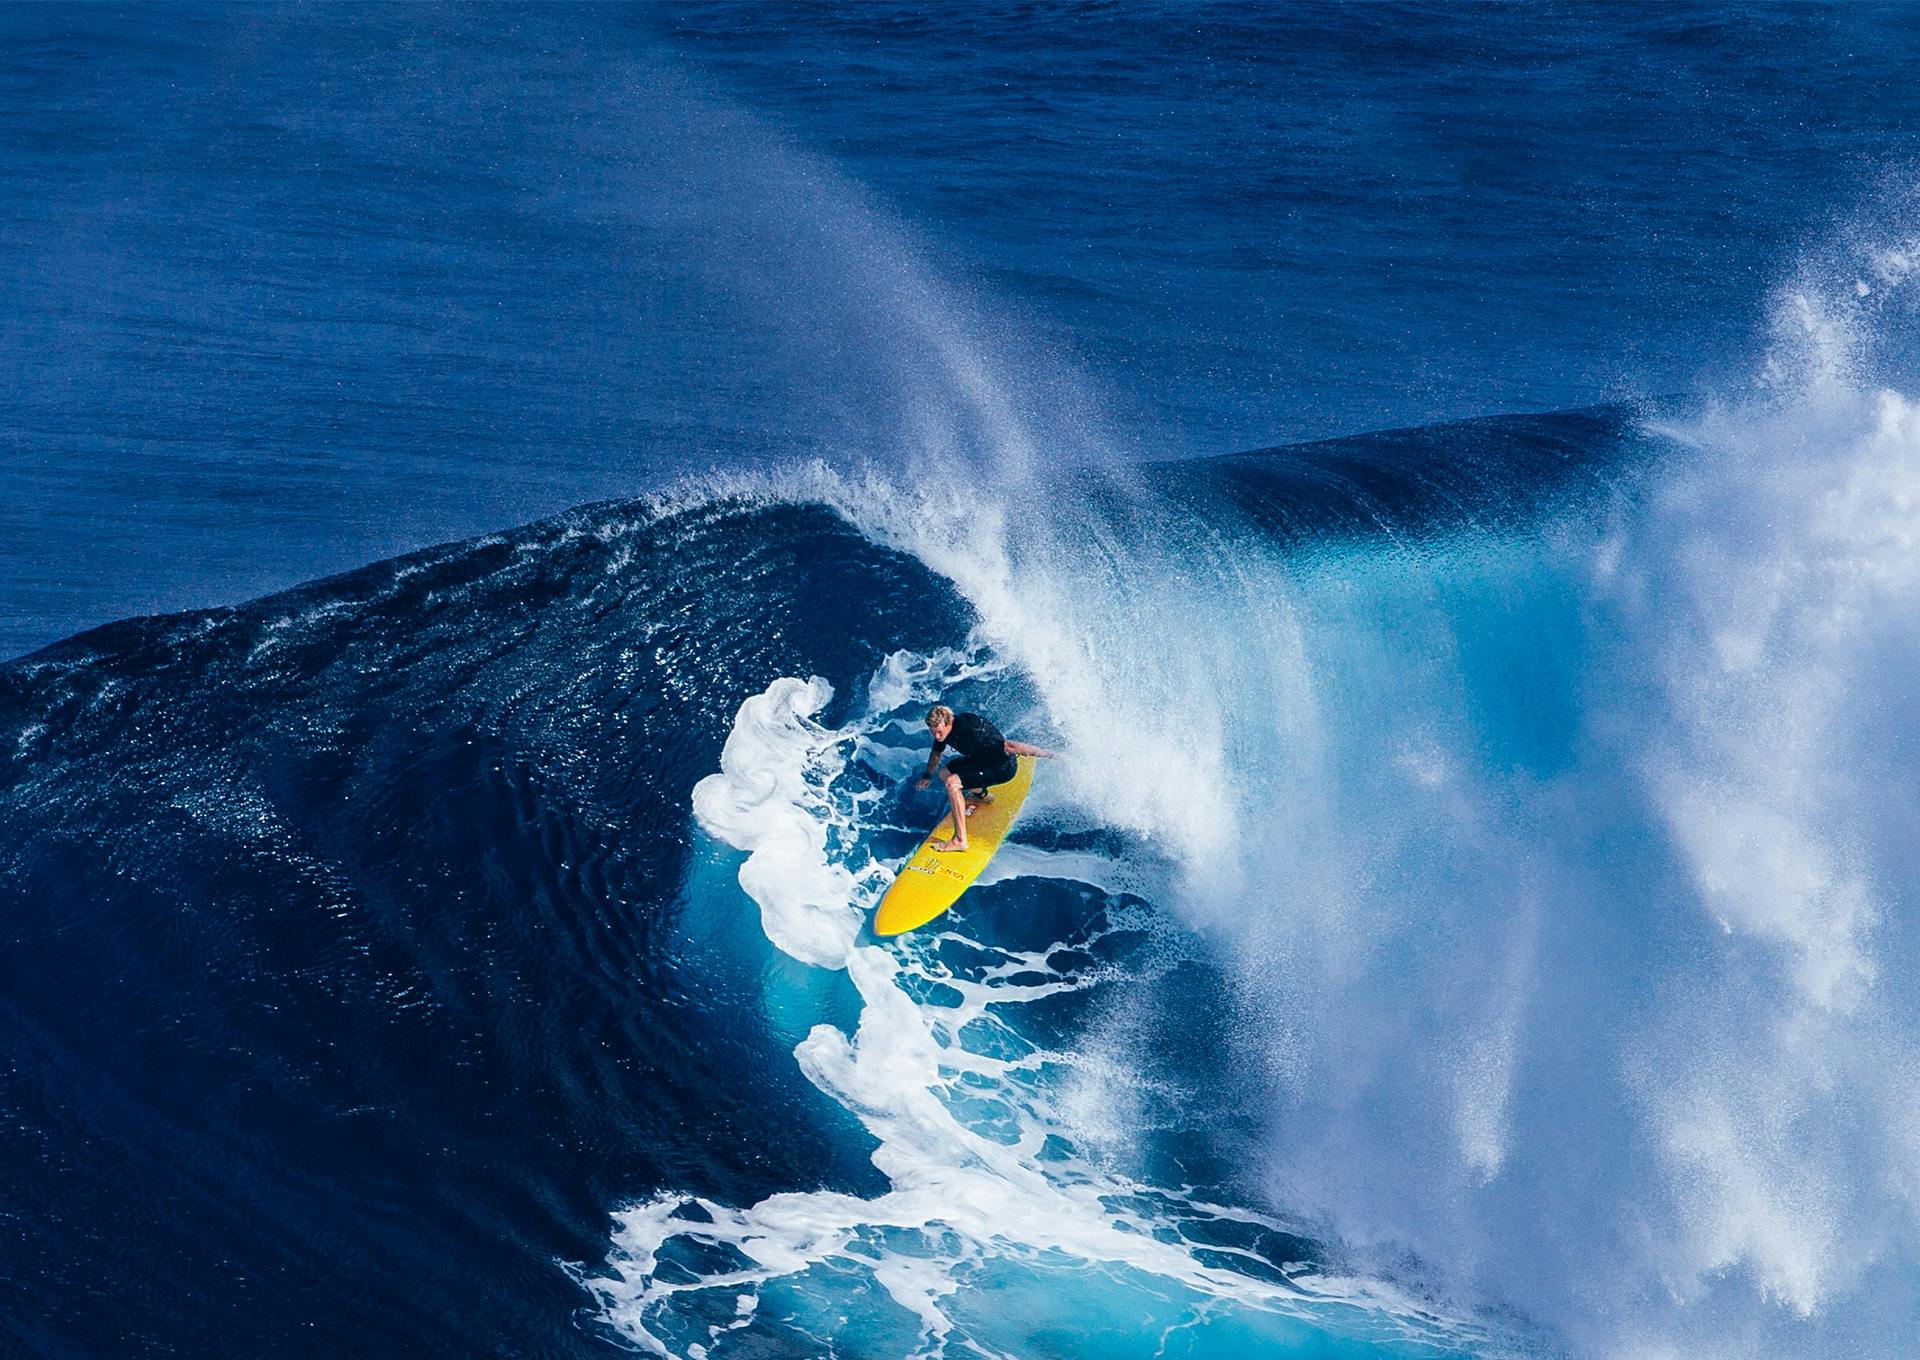 A man surfing on a yellow surfboard